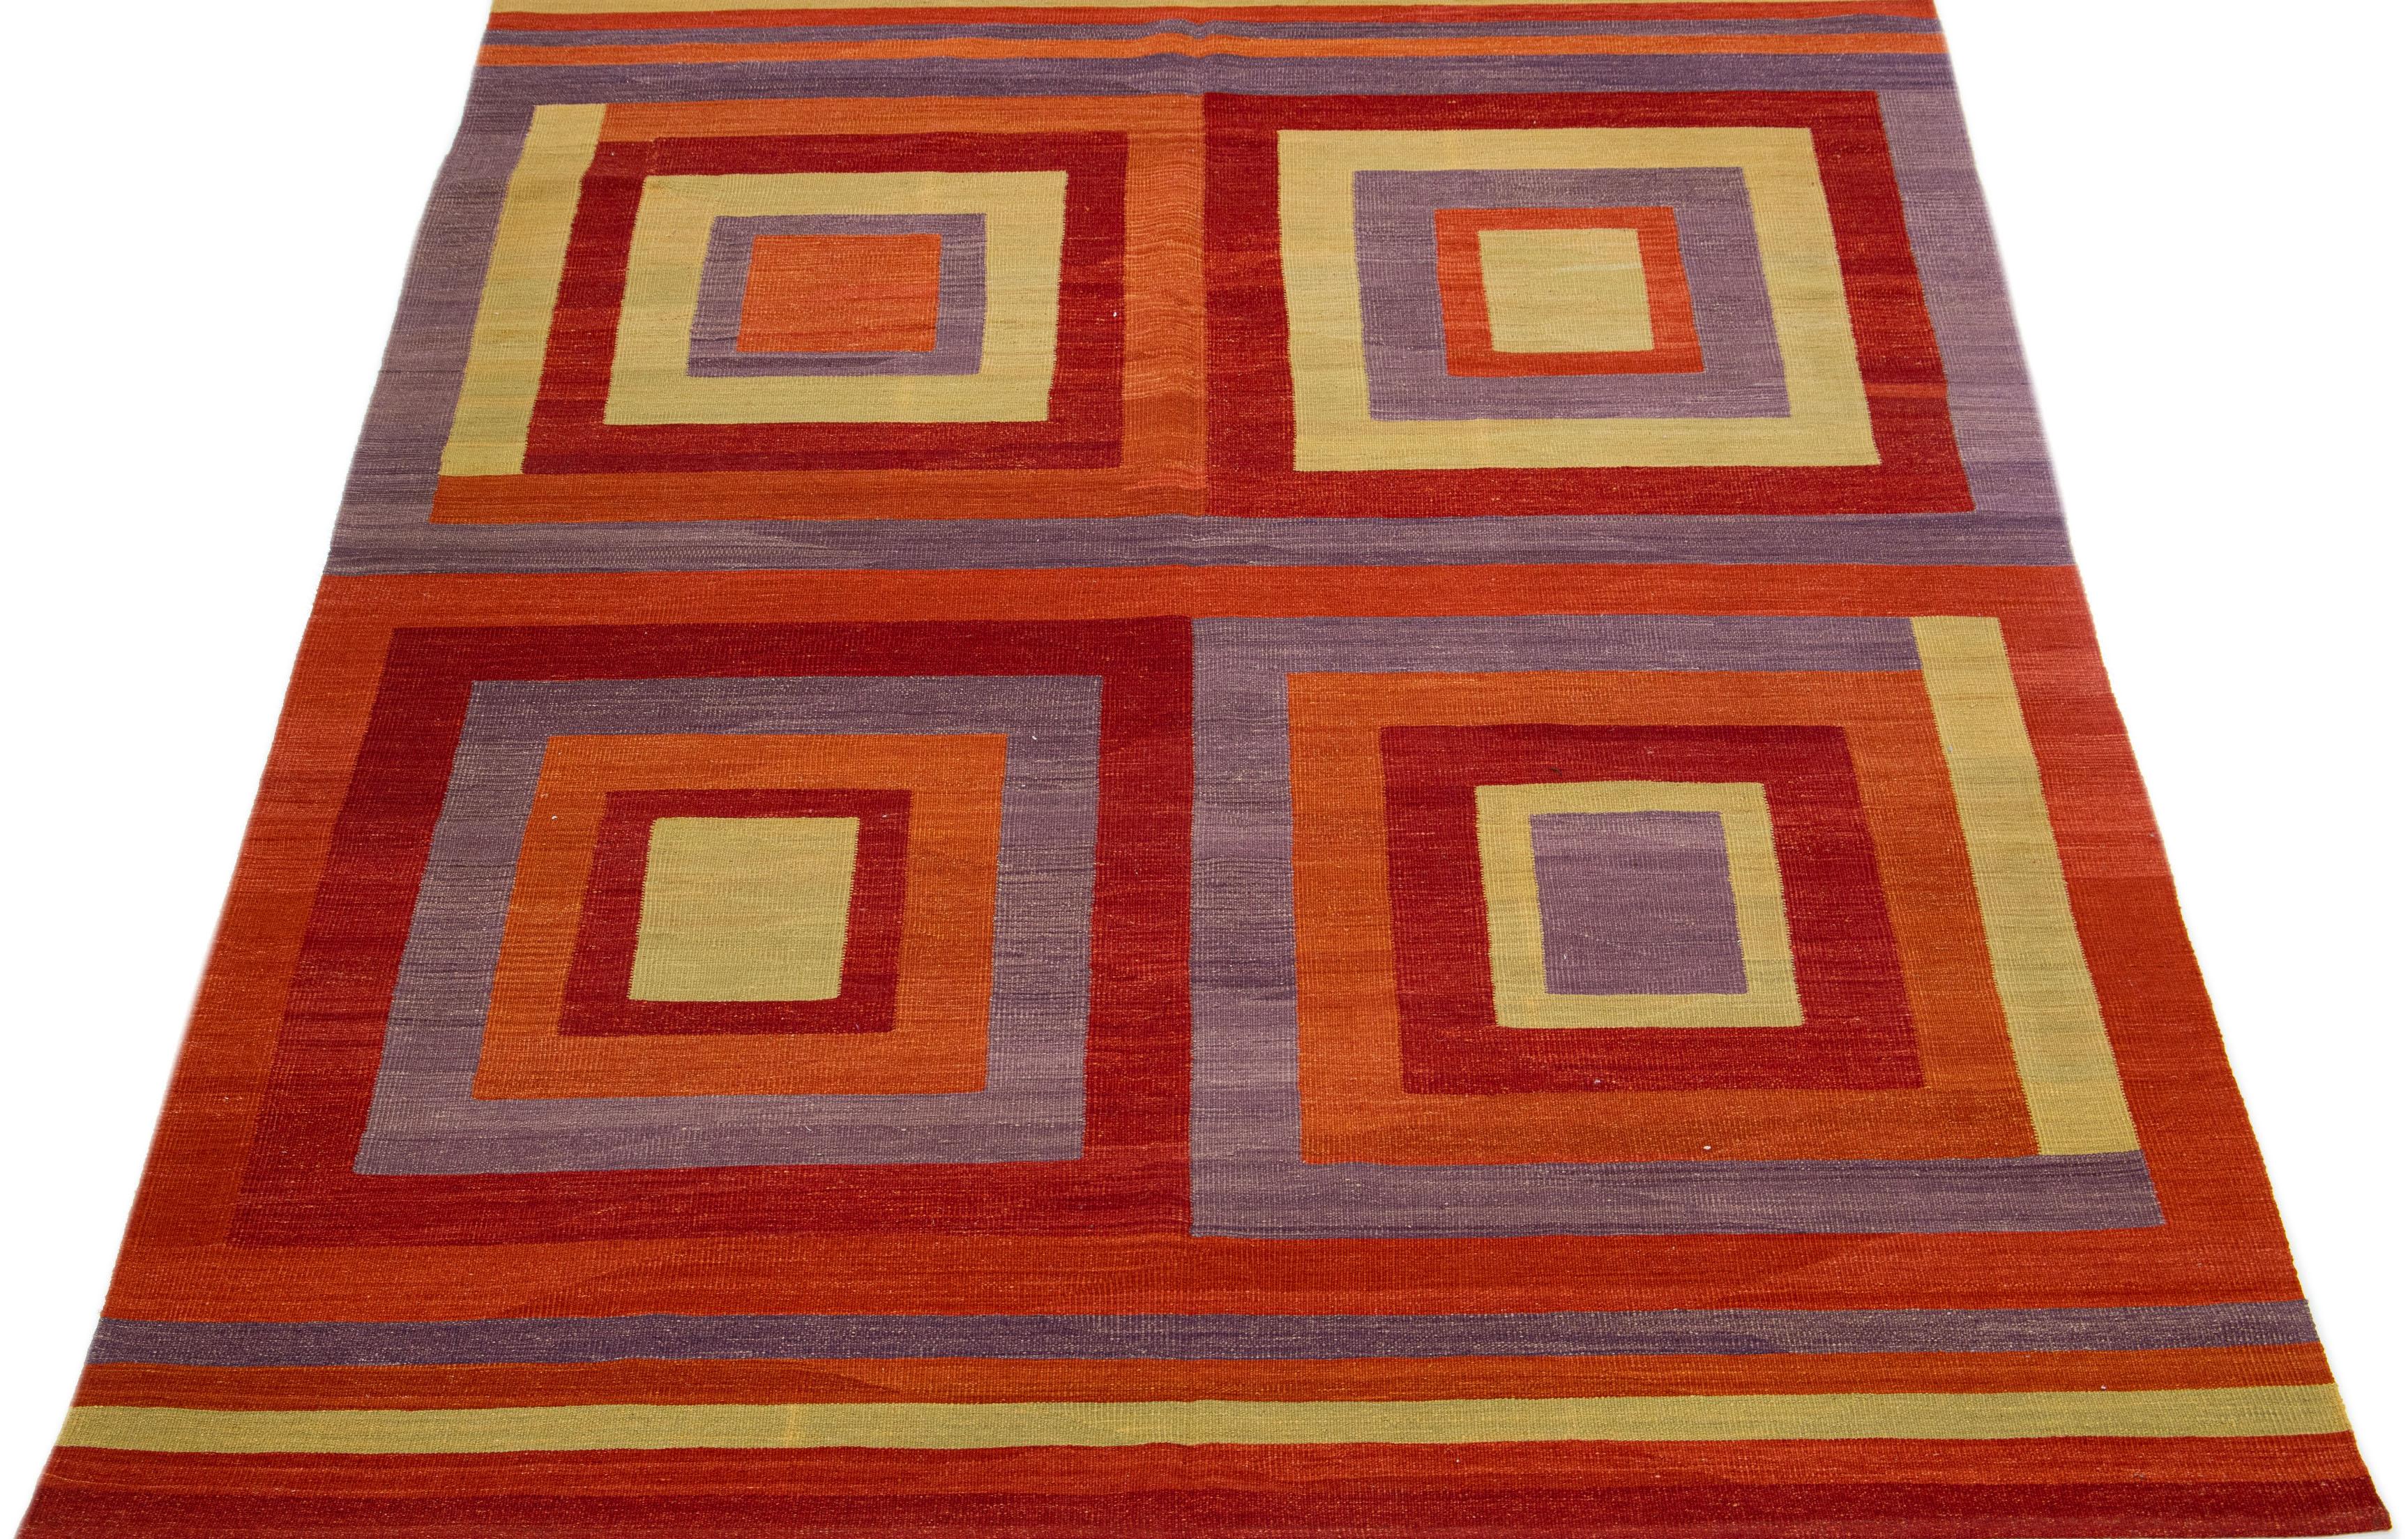 A contemporary kilim rug showcases an exuberant and detailed geometric motif throughout. It employs various multicolored tones that make it an ageless incorporation in modern interior design.

This rug measures 6'11